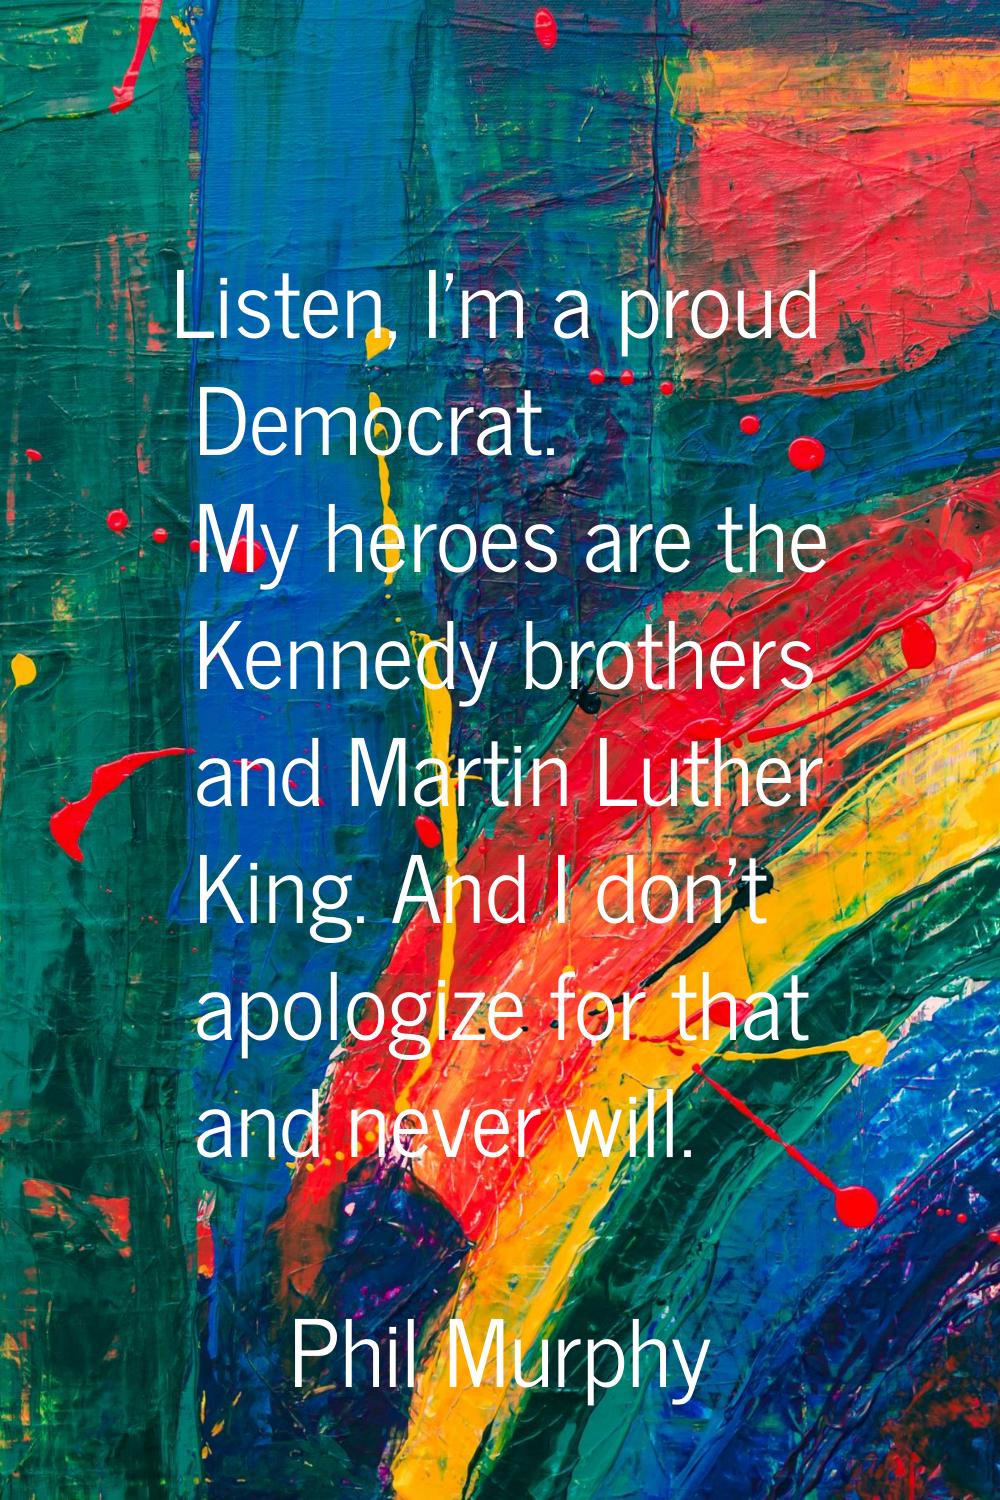 Listen, I'm a proud Democrat. My heroes are the Kennedy brothers and Martin Luther King. And I don'